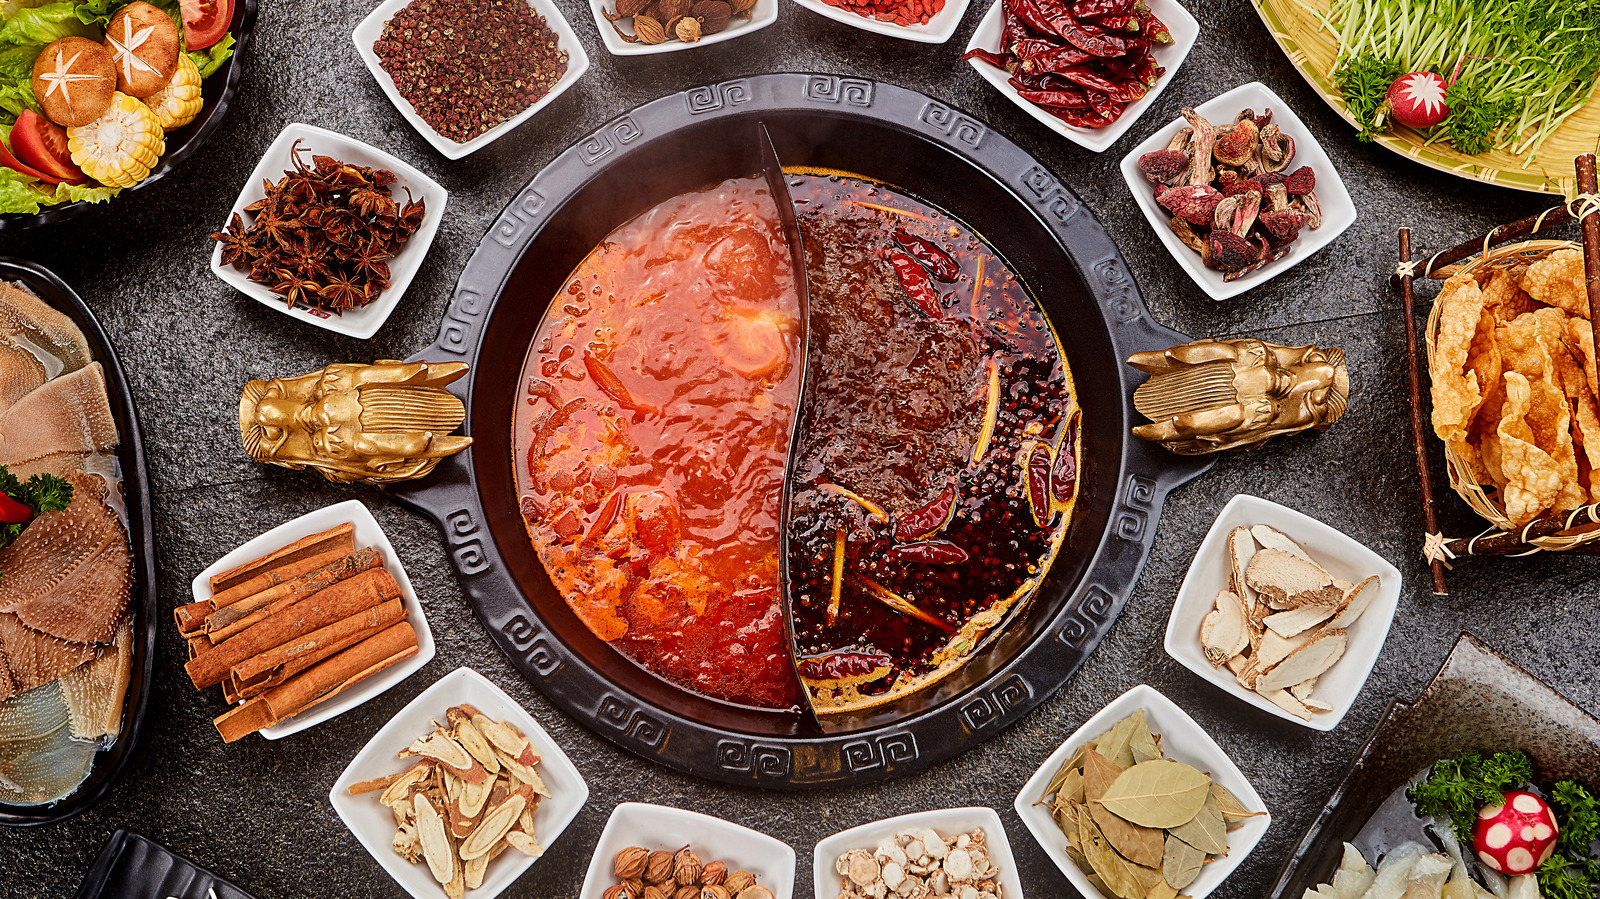 No more fishing out the spices from your hot pot